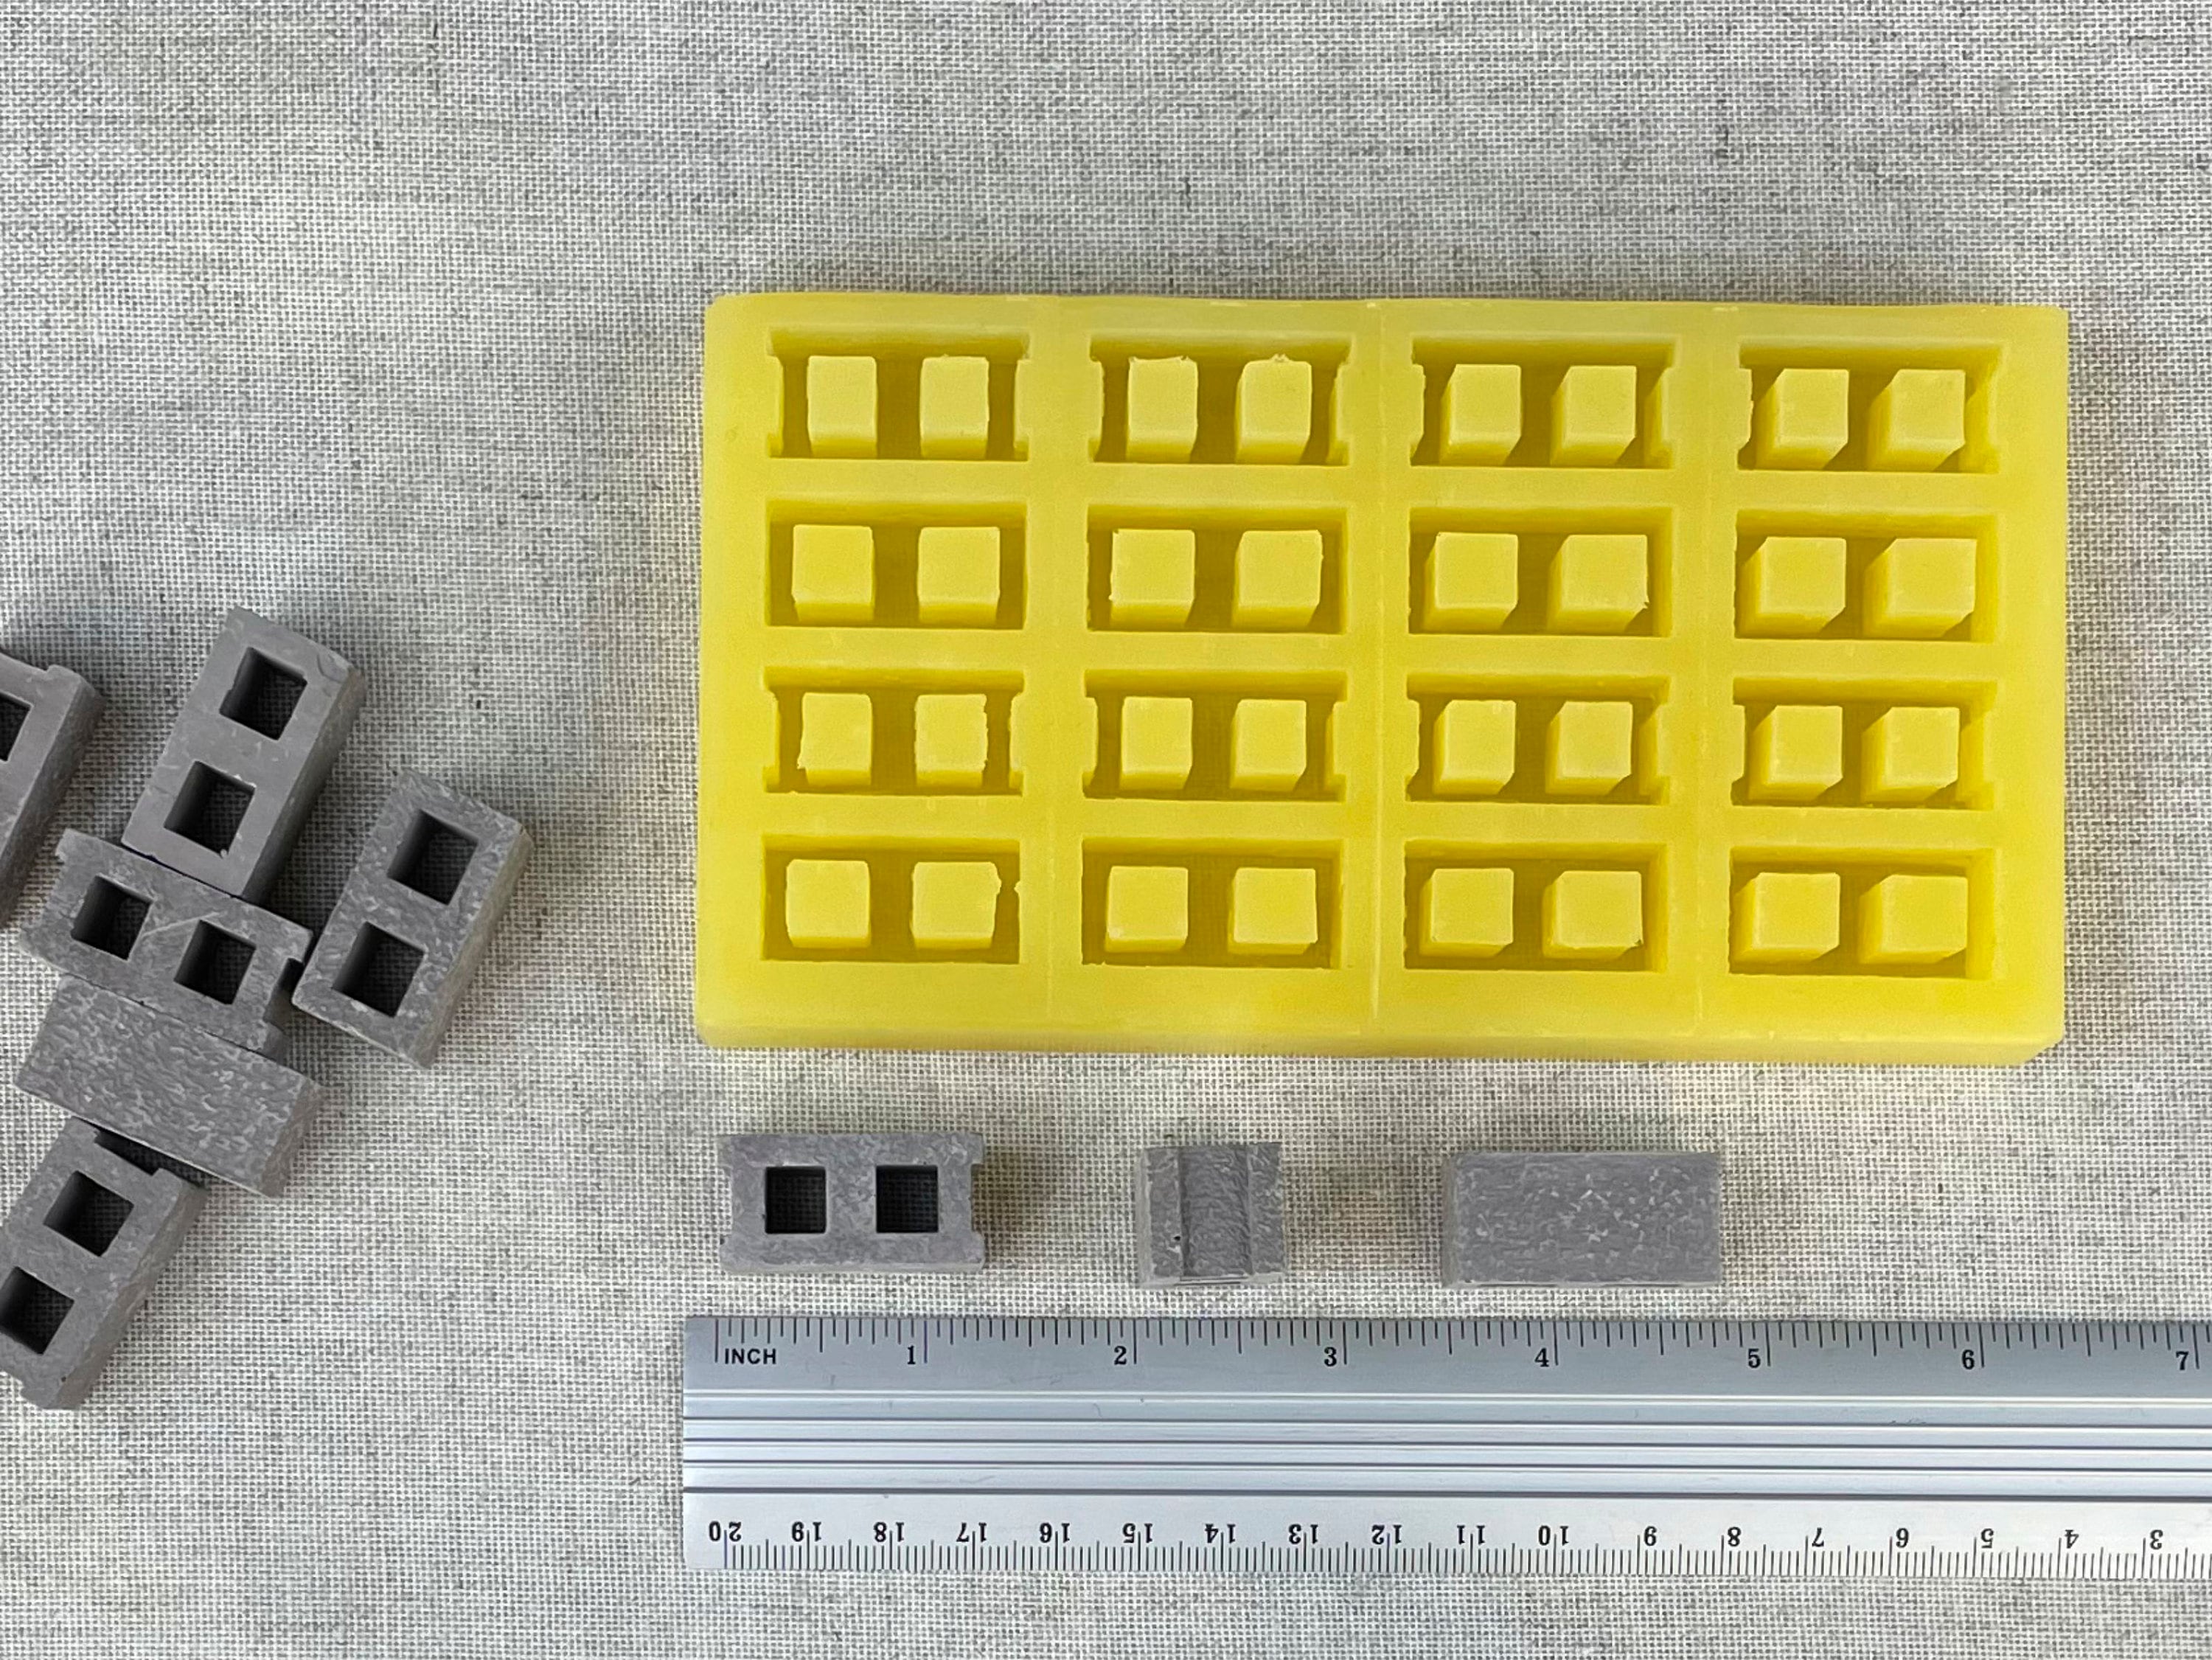 Miniature Cinder Block Mold, 1:18 Scale, Silicone Rubber. A Perfect  Addition to Your Diorama Supplies 